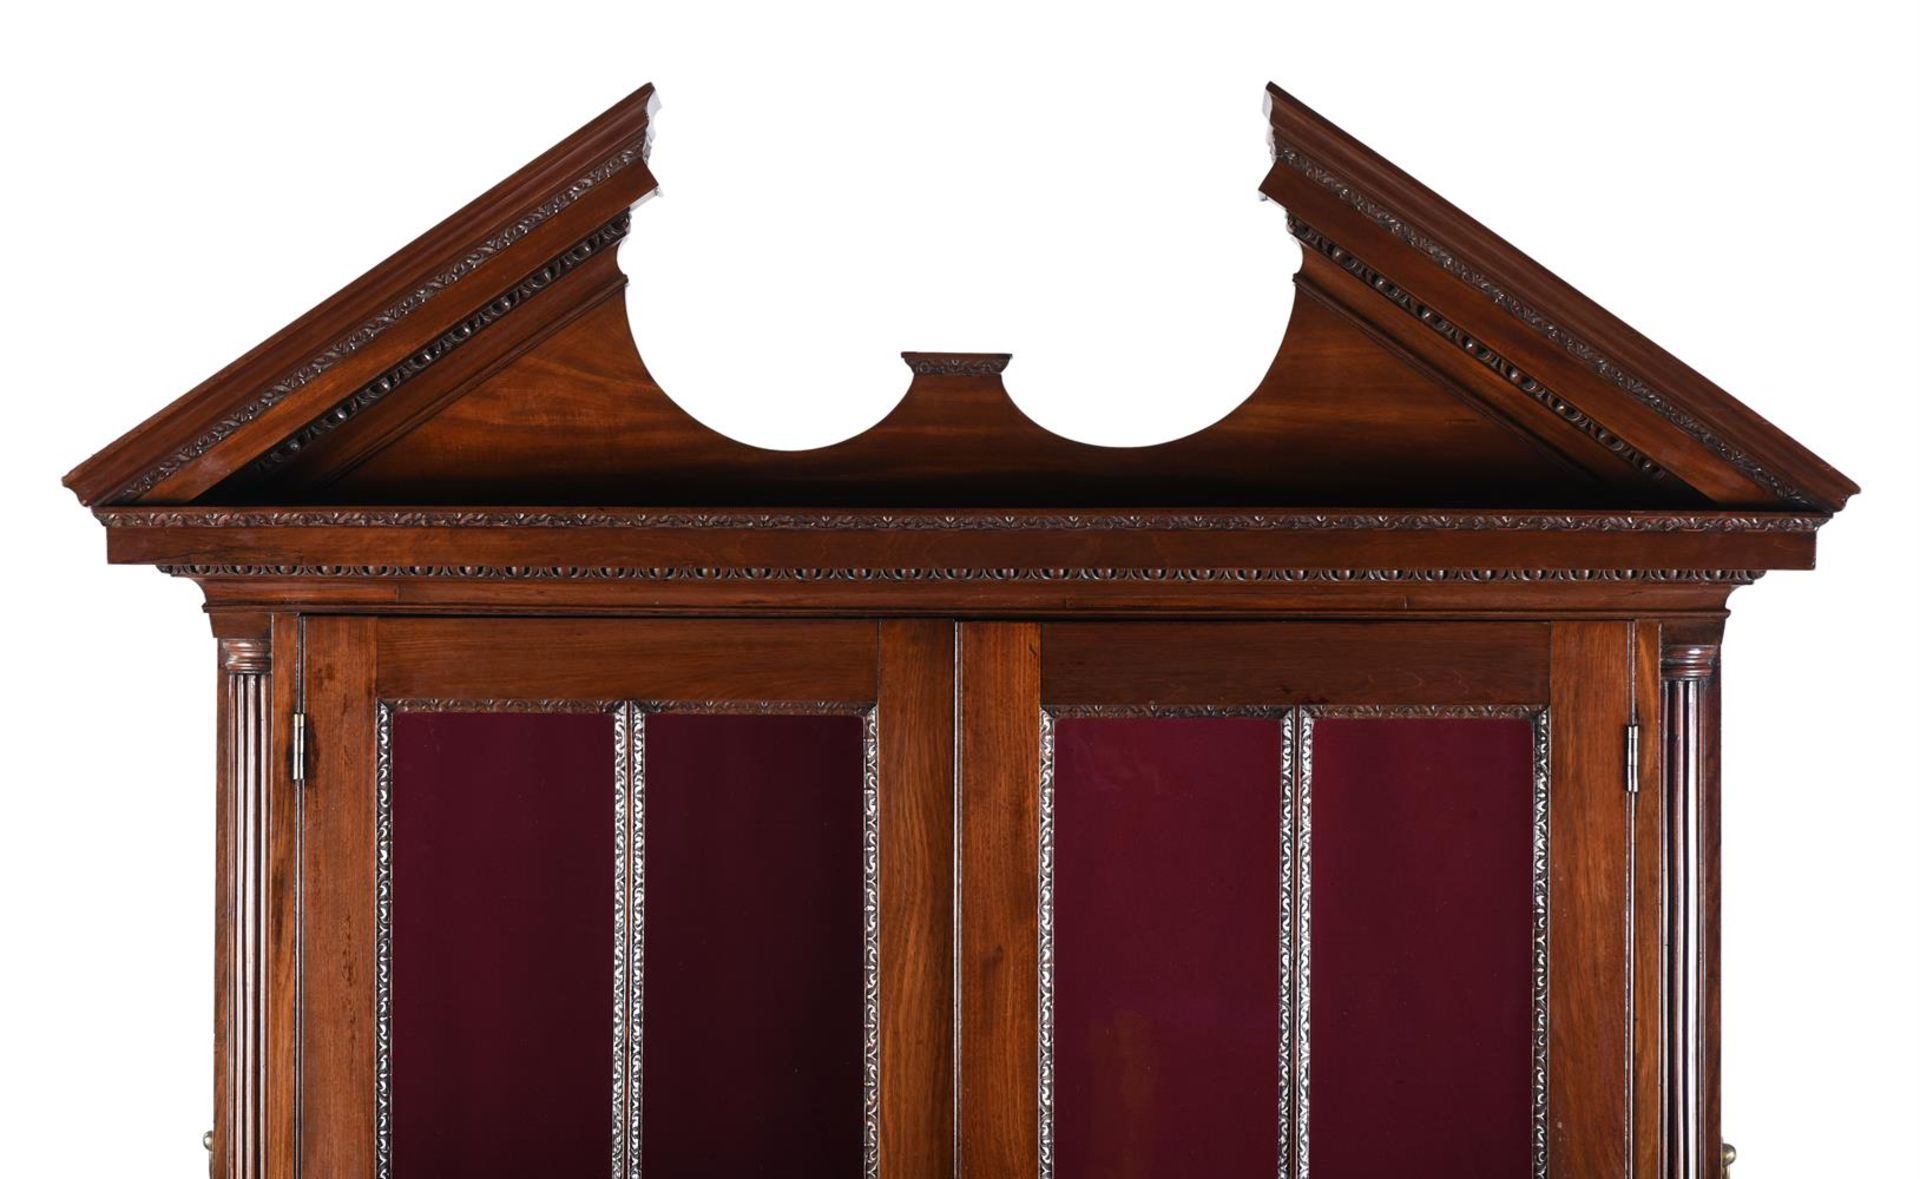 AN EARLY GEORGE III MAHOGANY BOOKCASE, IN THE MANNER OF WILLIAM HALLETT, CIRCA 1765 - Image 3 of 3